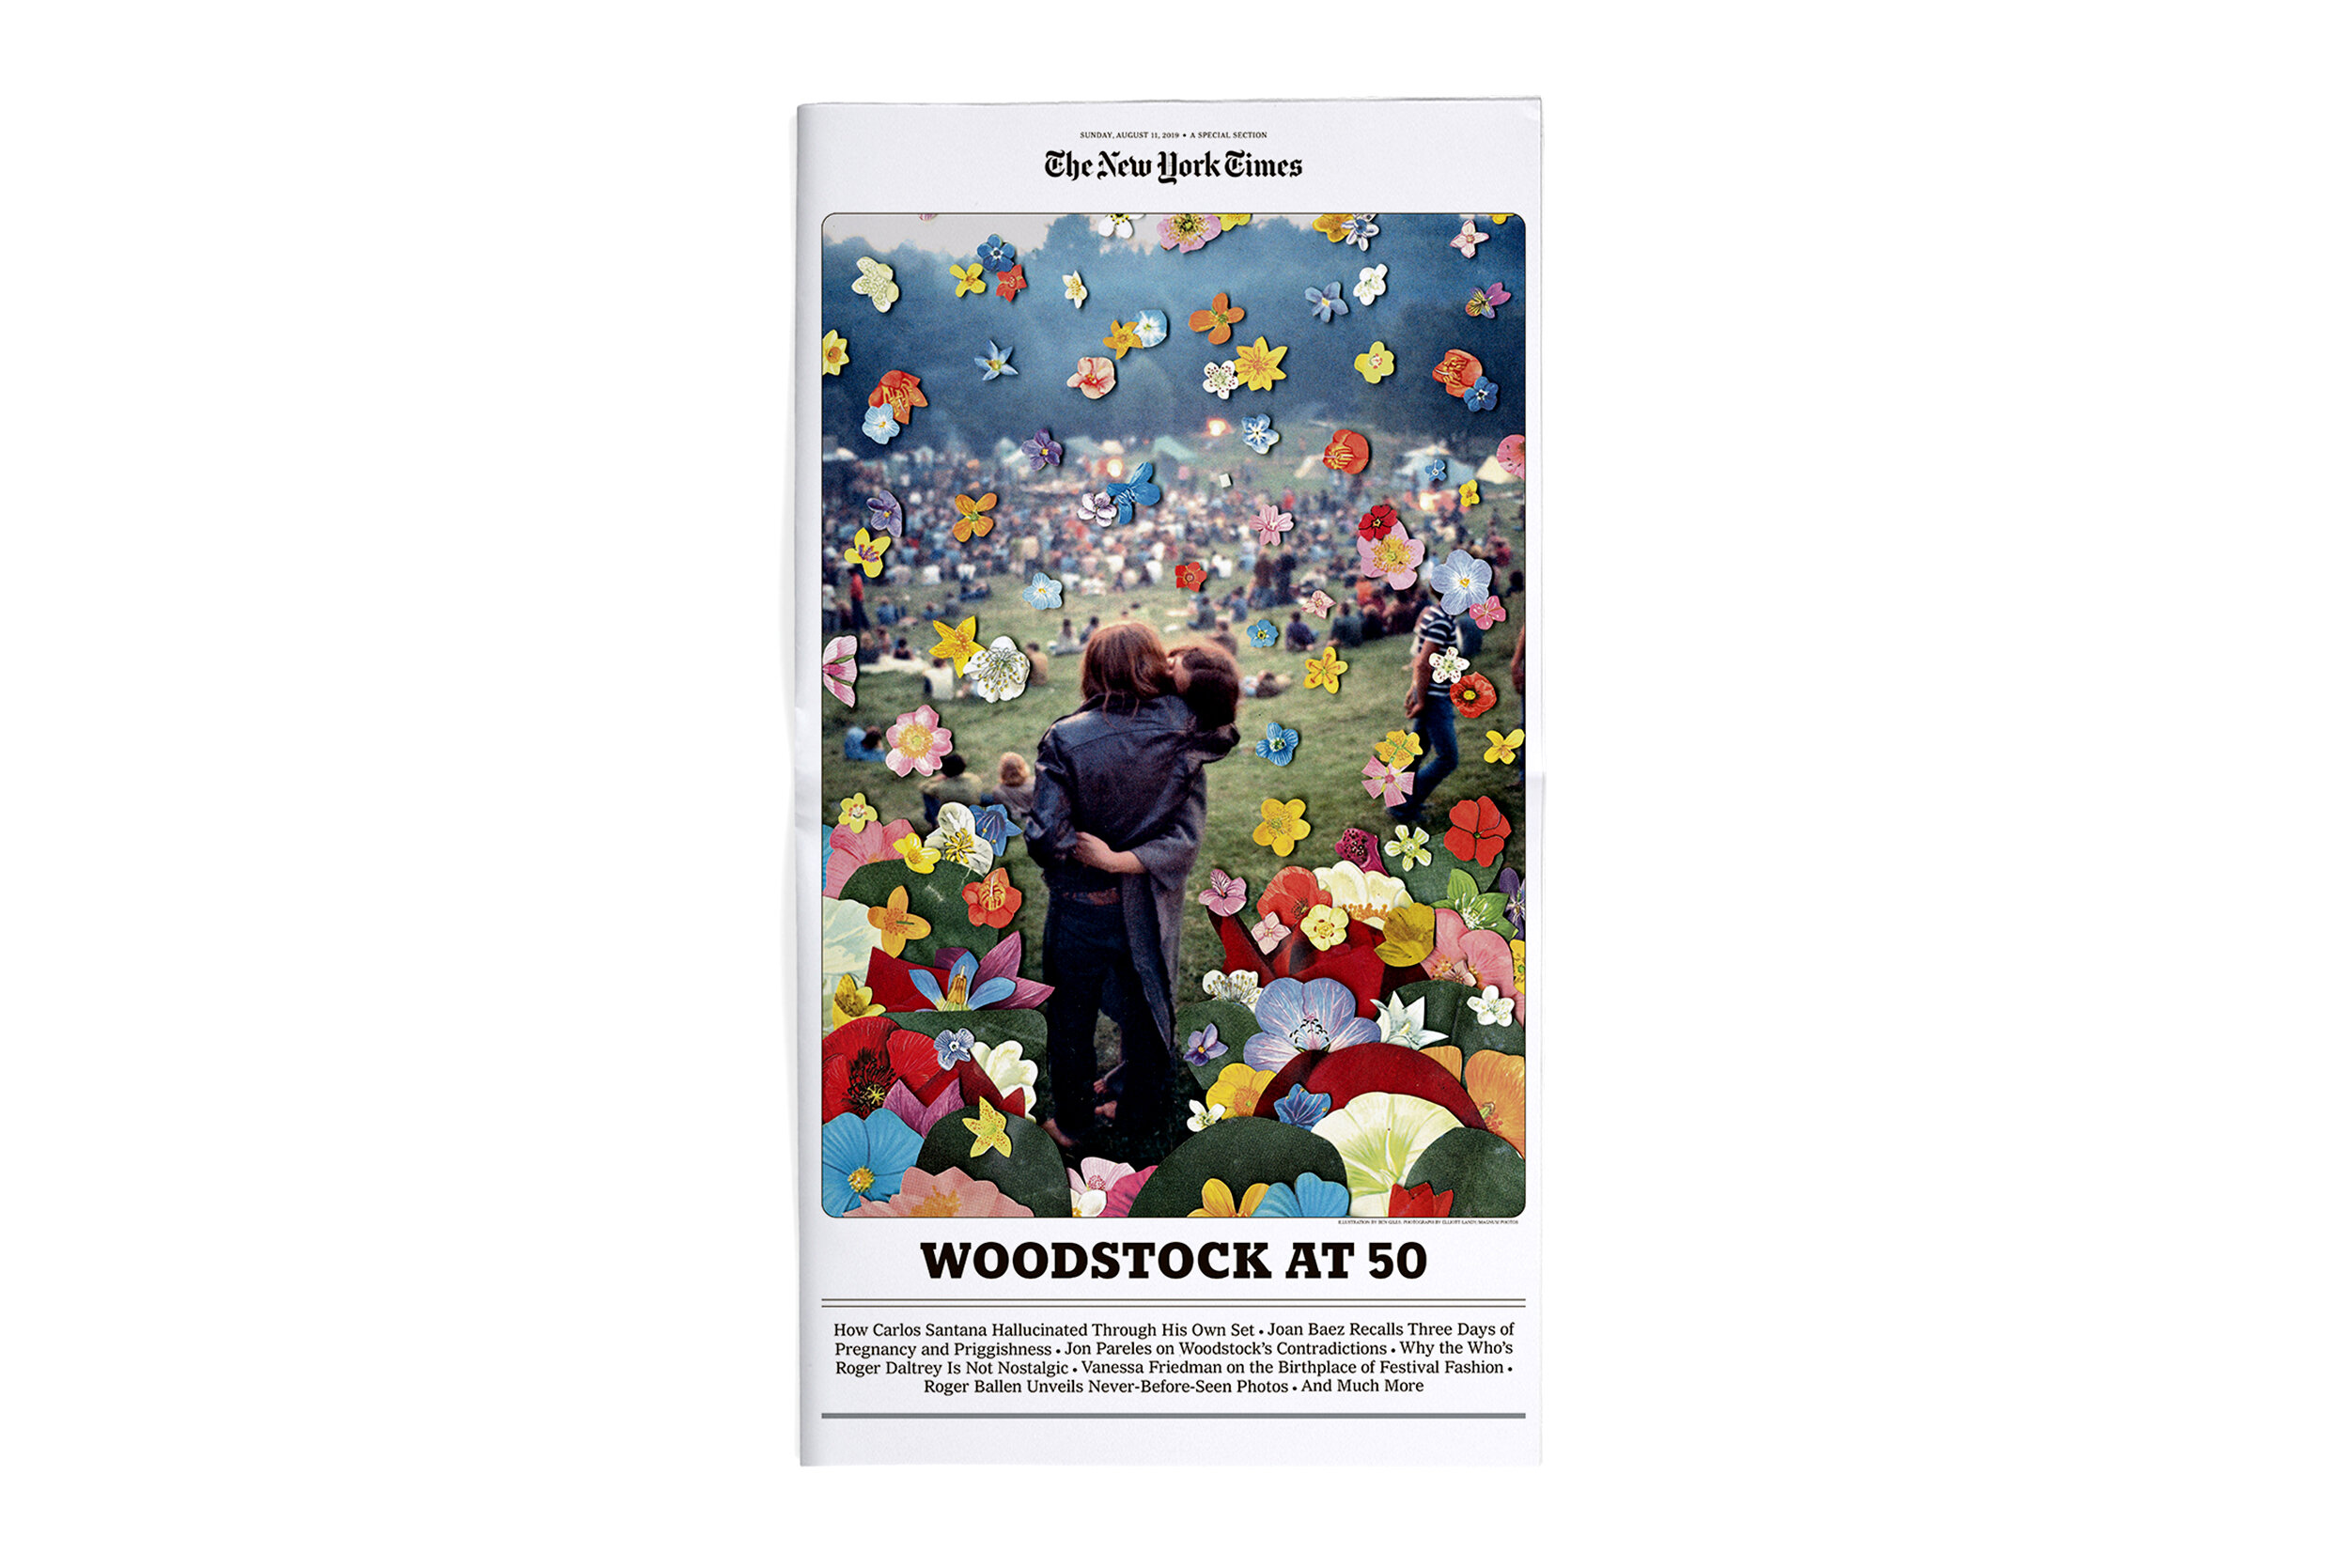   Woodstock at 50 . Photograph by Elliott Landy and illustration by Ben Giles. 